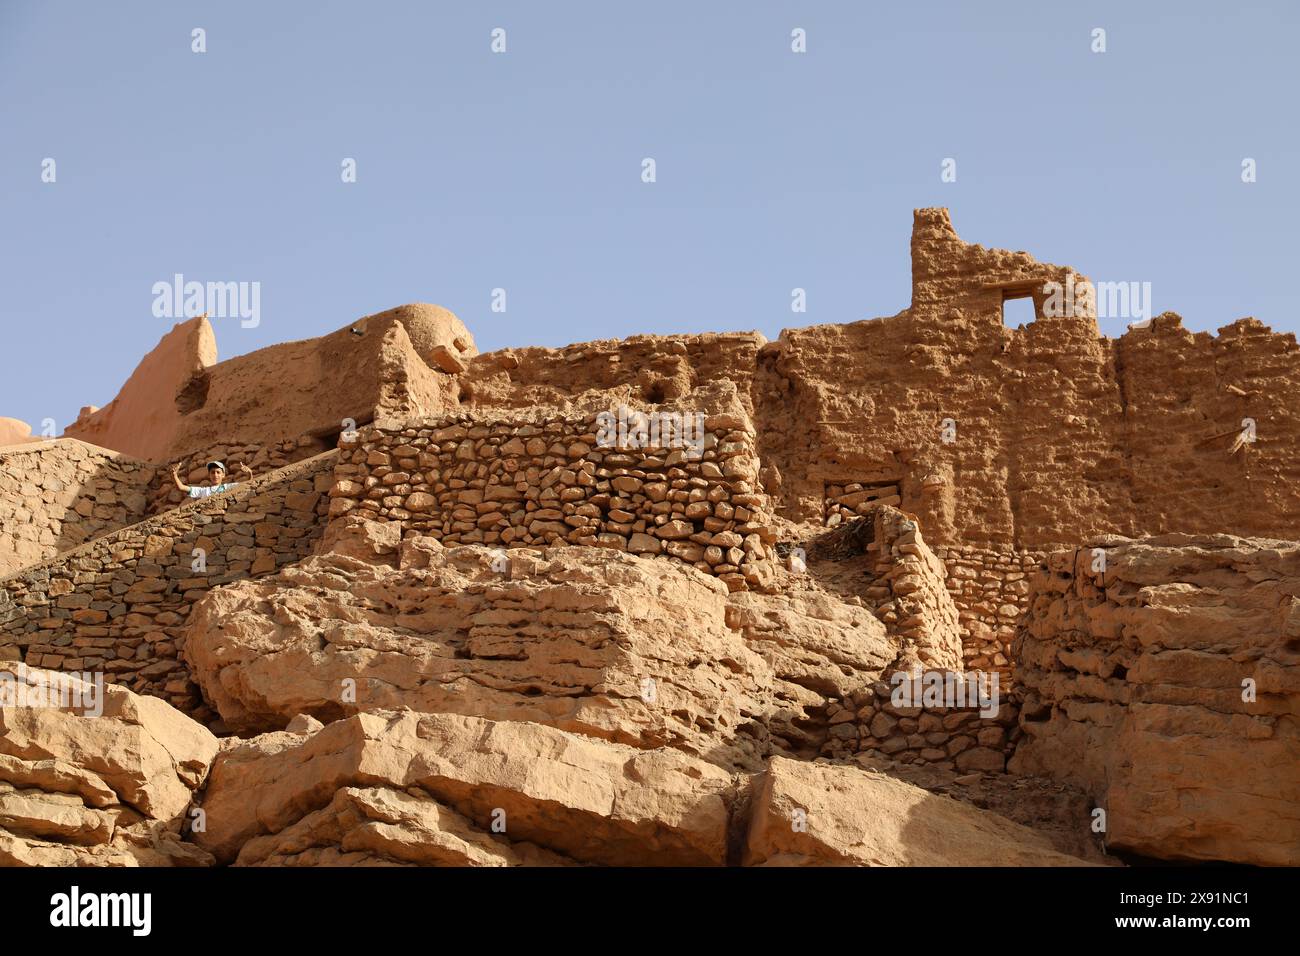 Fortified mudbrick village at Taghit in Algeria Stock Photo